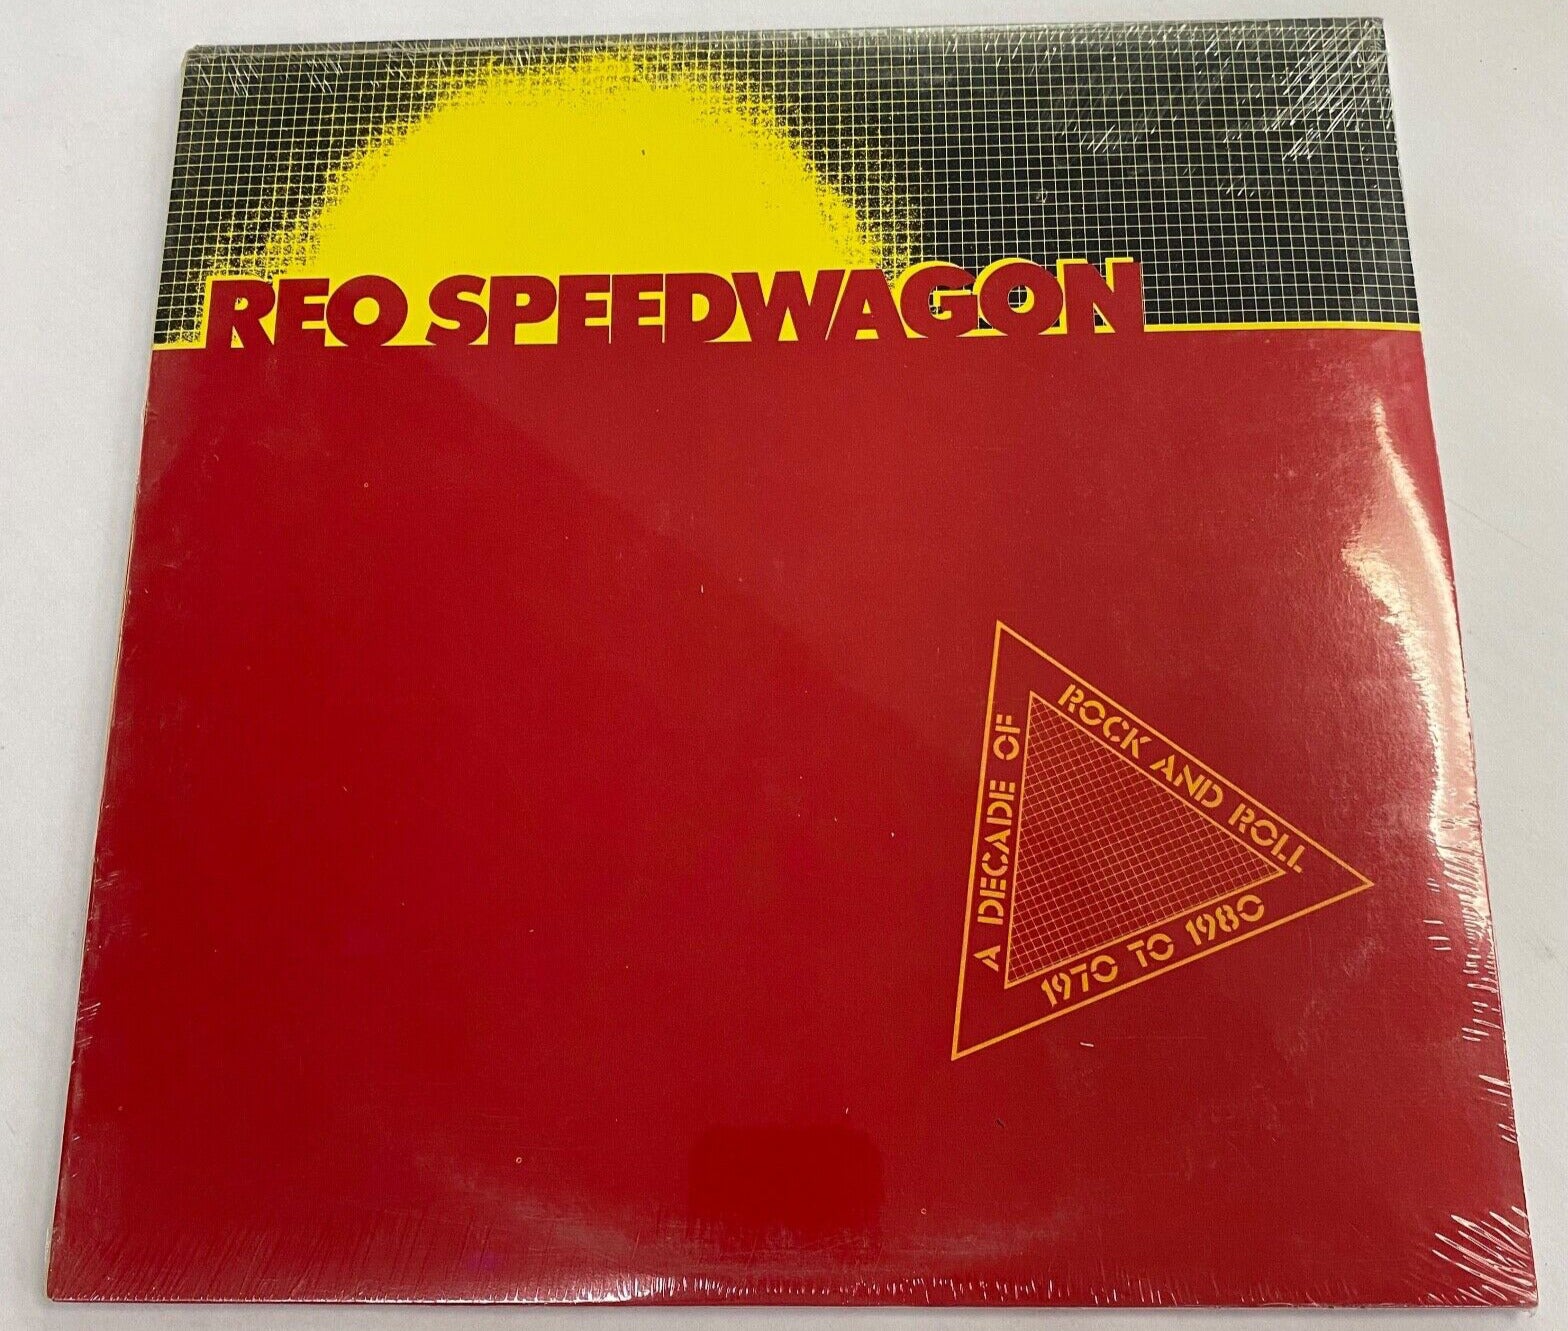 Reo Speedwagon: A decade of Rock And Roll, 1970-1980 (1980, 2 LPs) *NEW/SEALED